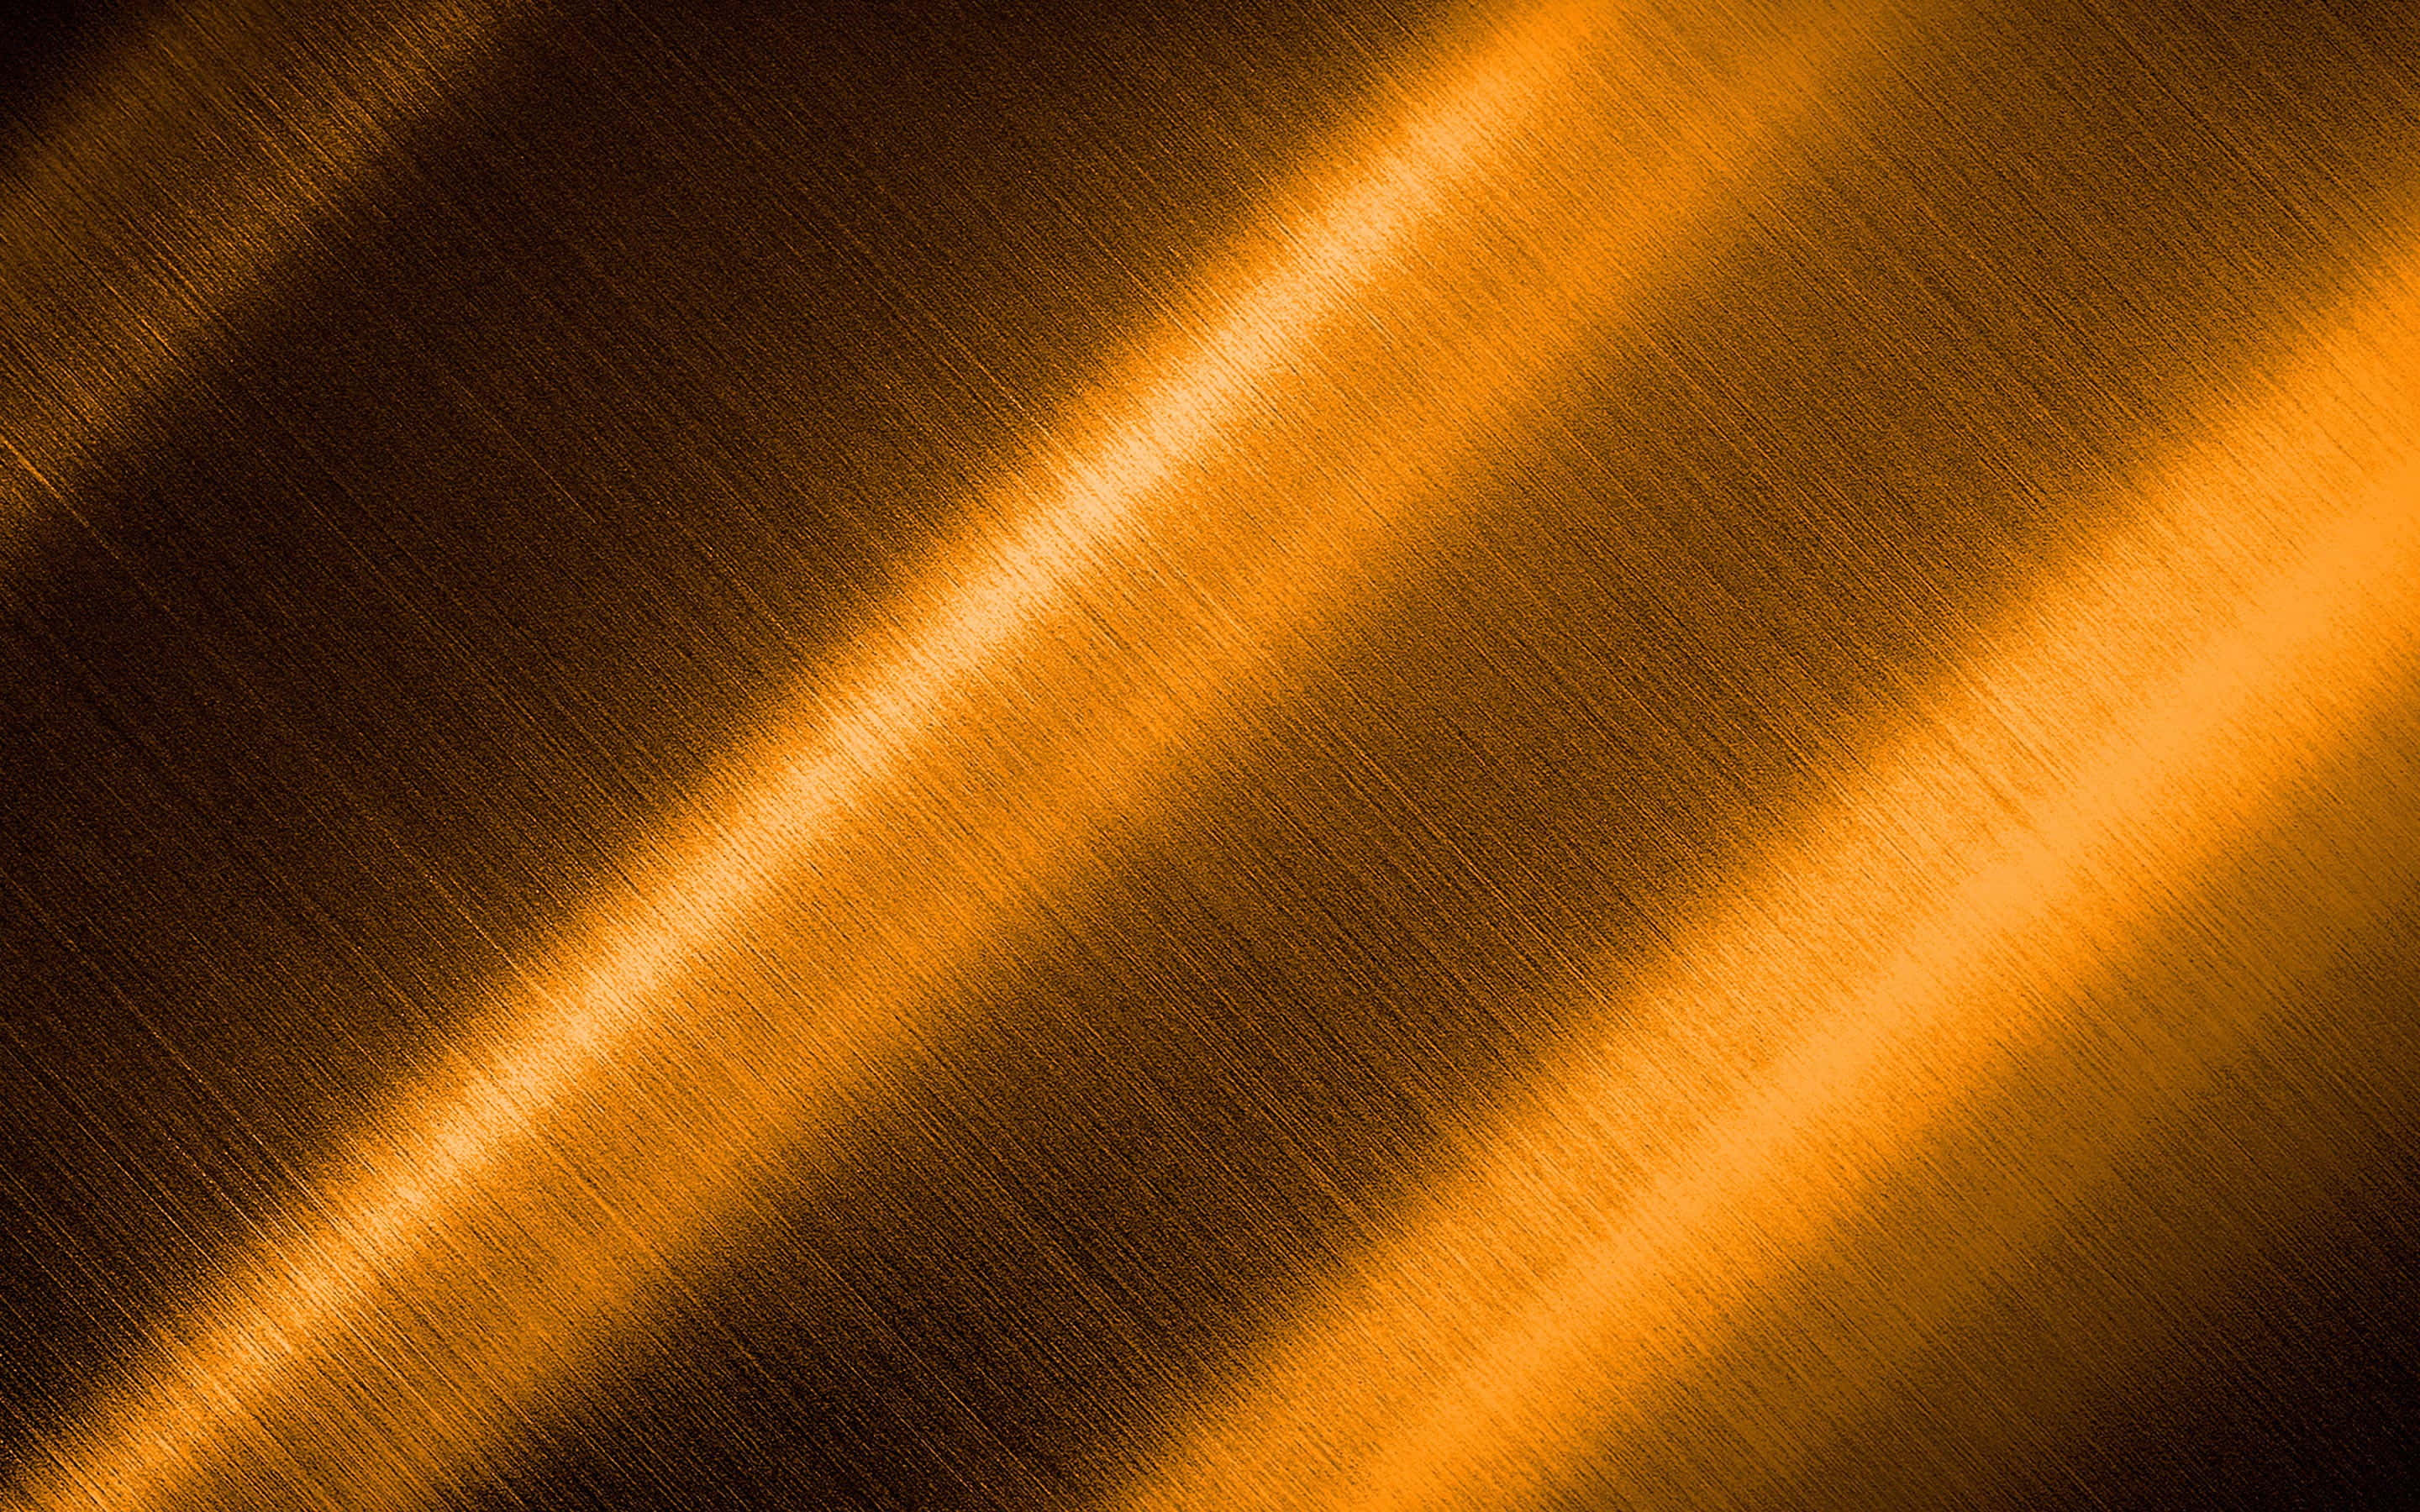 A Close Up Image Of A Shiny Metal Background